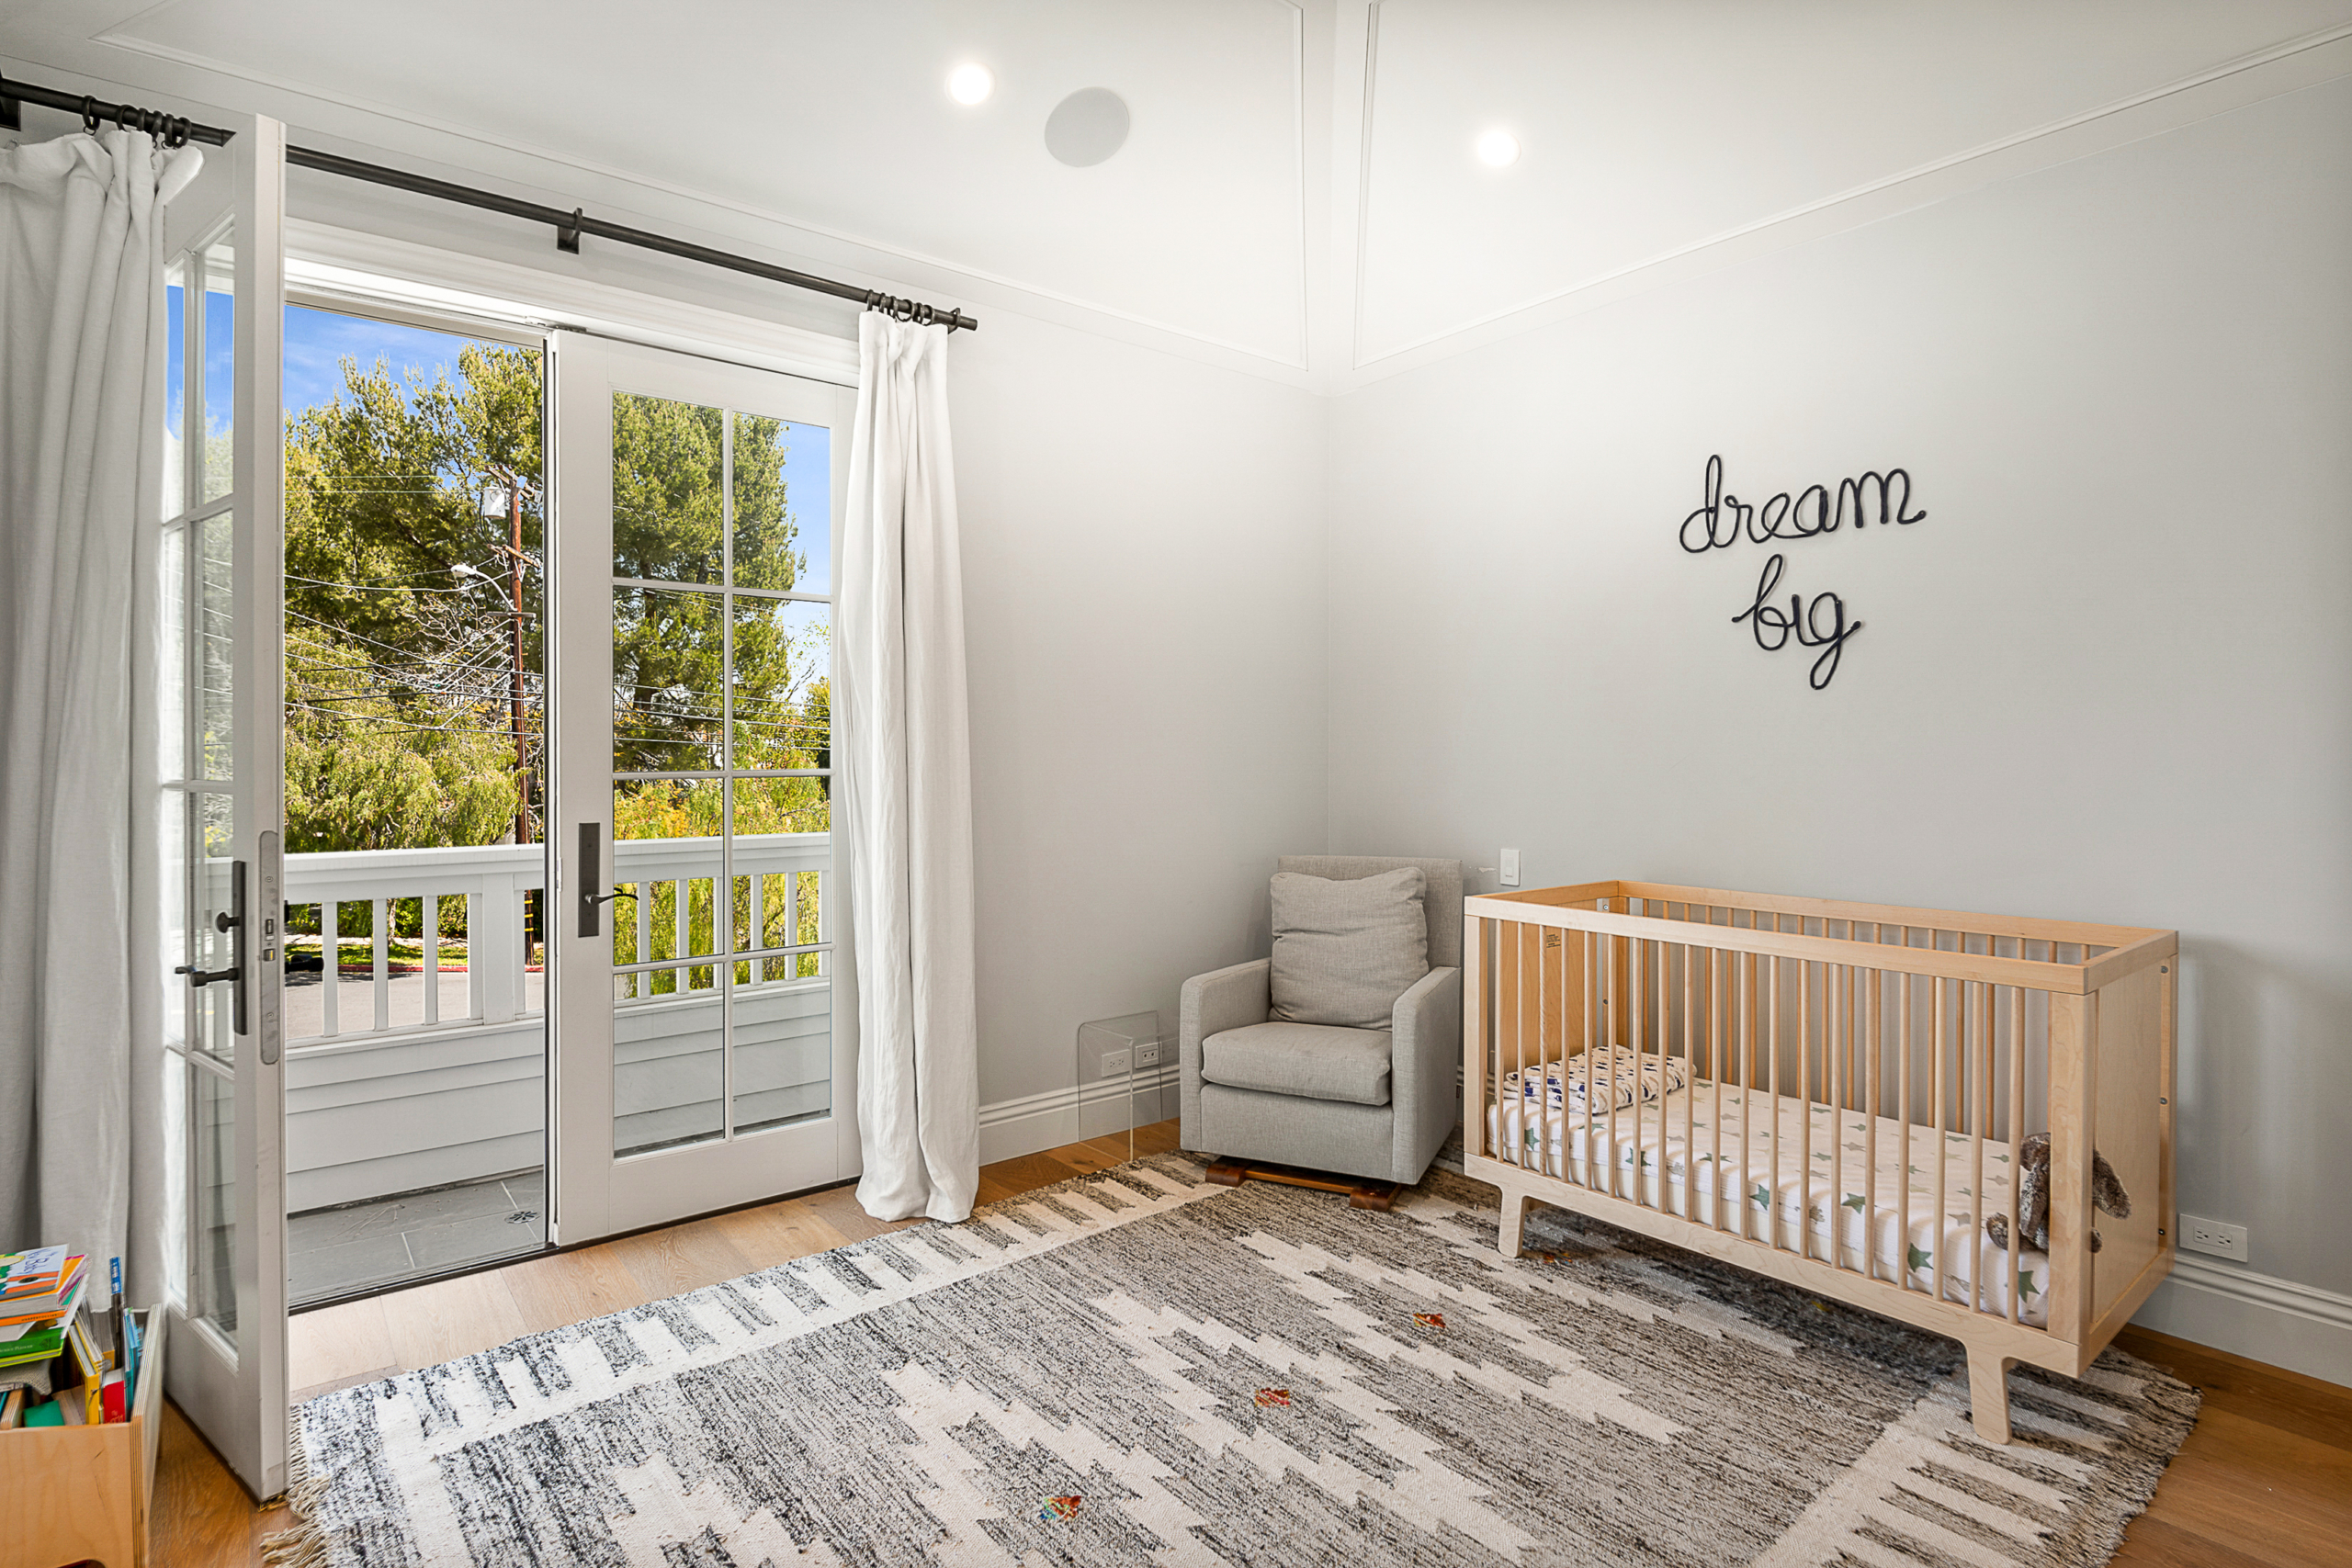 Child's bedroom with crib and French doors opening to balcony